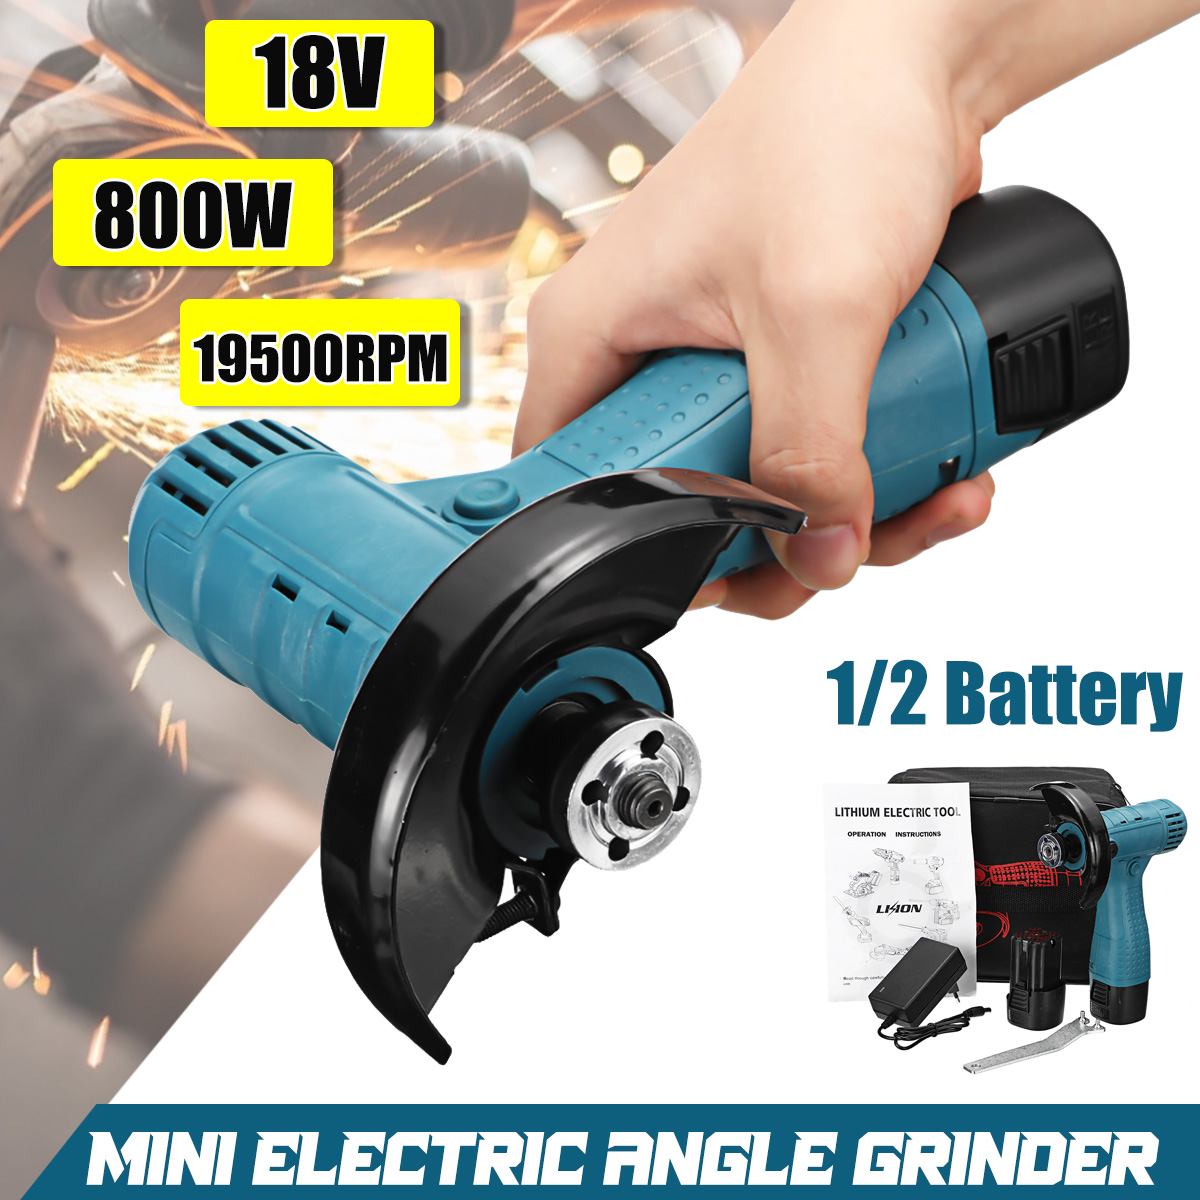 100mm-18V-800W-Electric-Angle-Grinder-Portable-Handheld-Cutting-Polishing-Tool-W-12-Battery-1871661-2